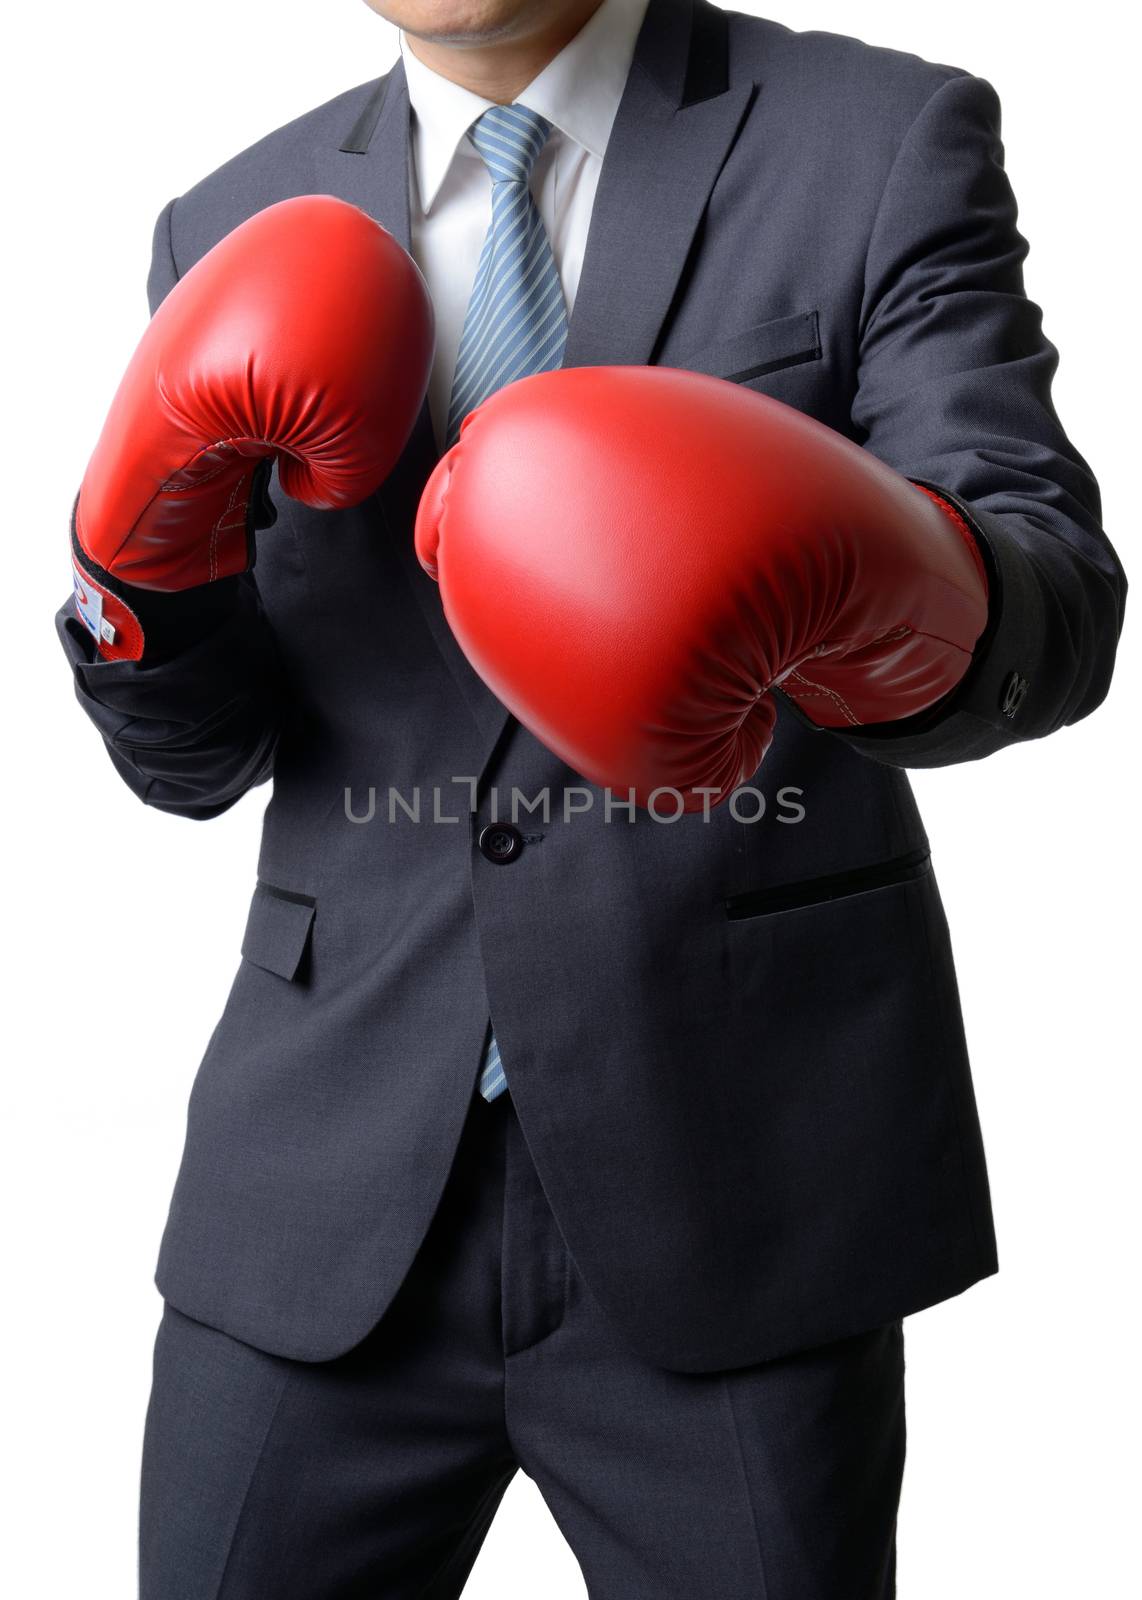 businessman with red boxing glove ready to fight with work, business concept